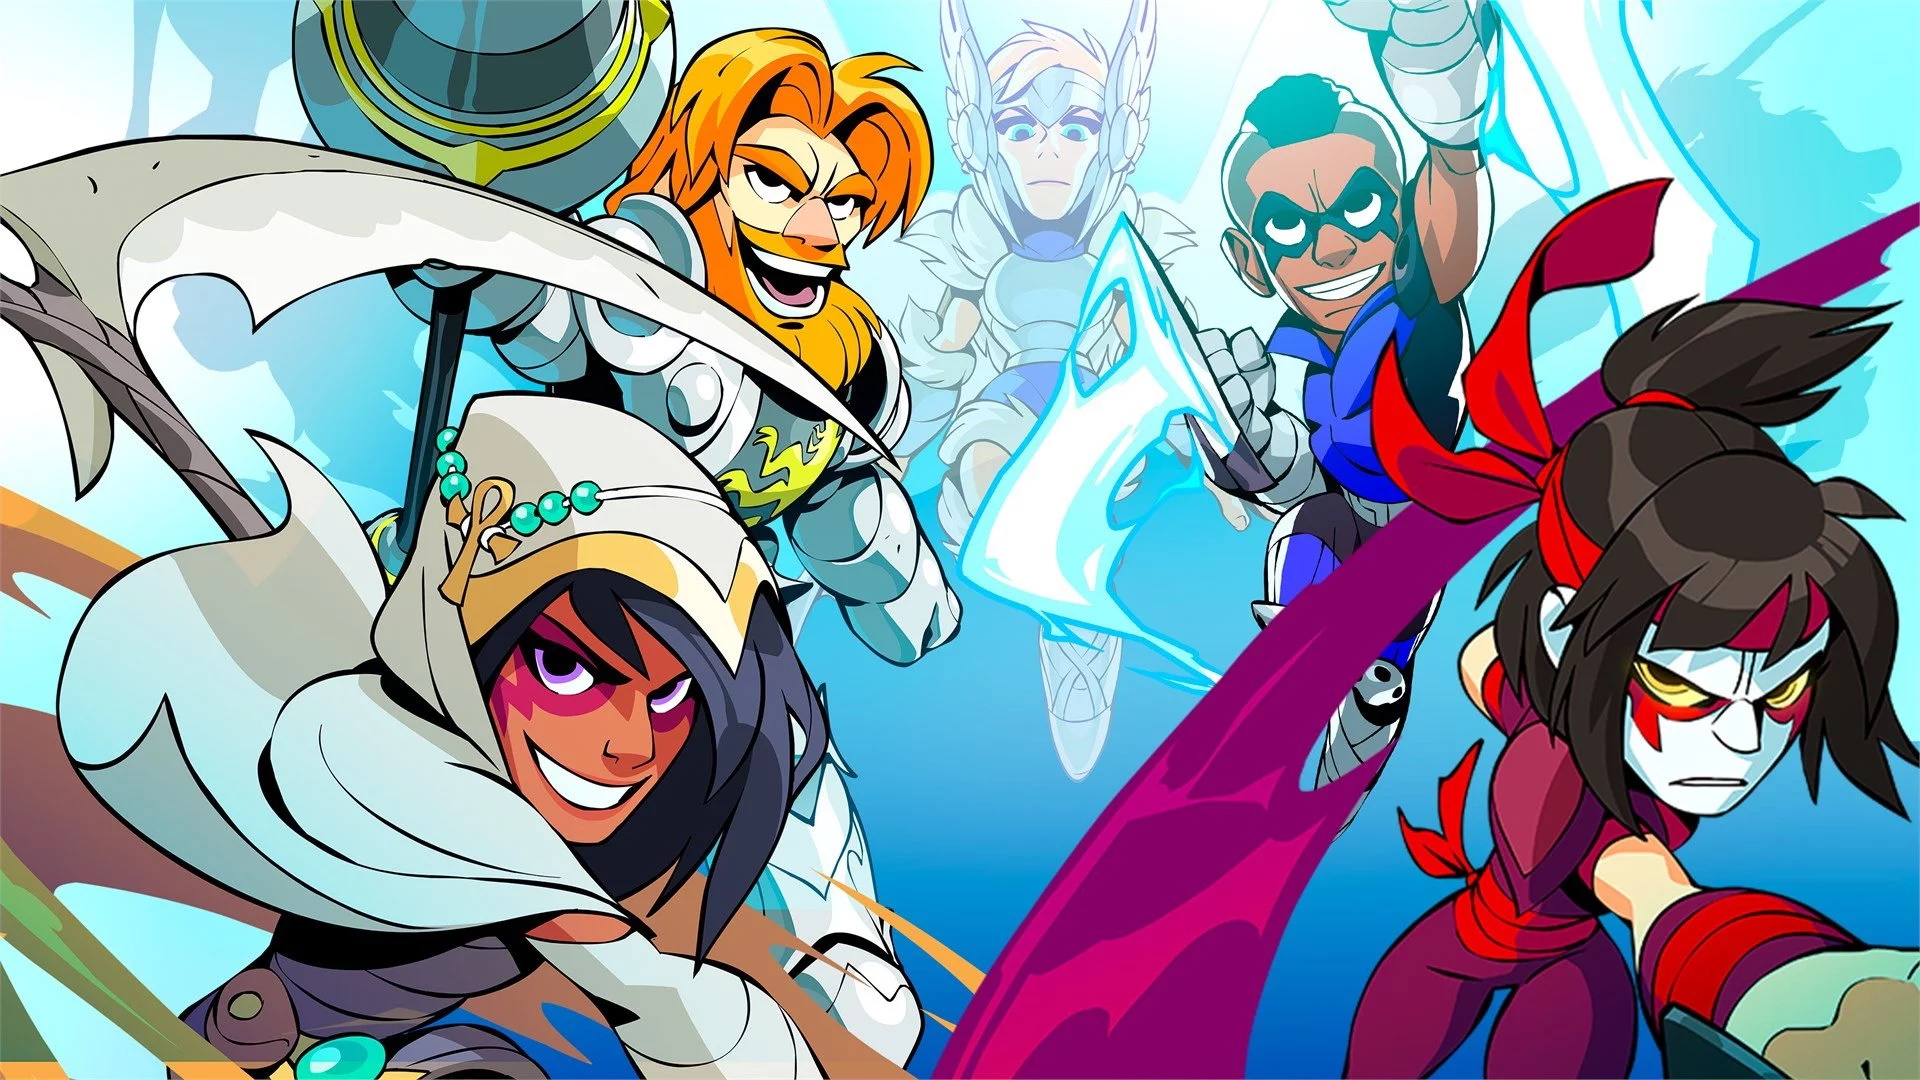 brawlhalla-to-release-on-ios-and-android-devices.jpg